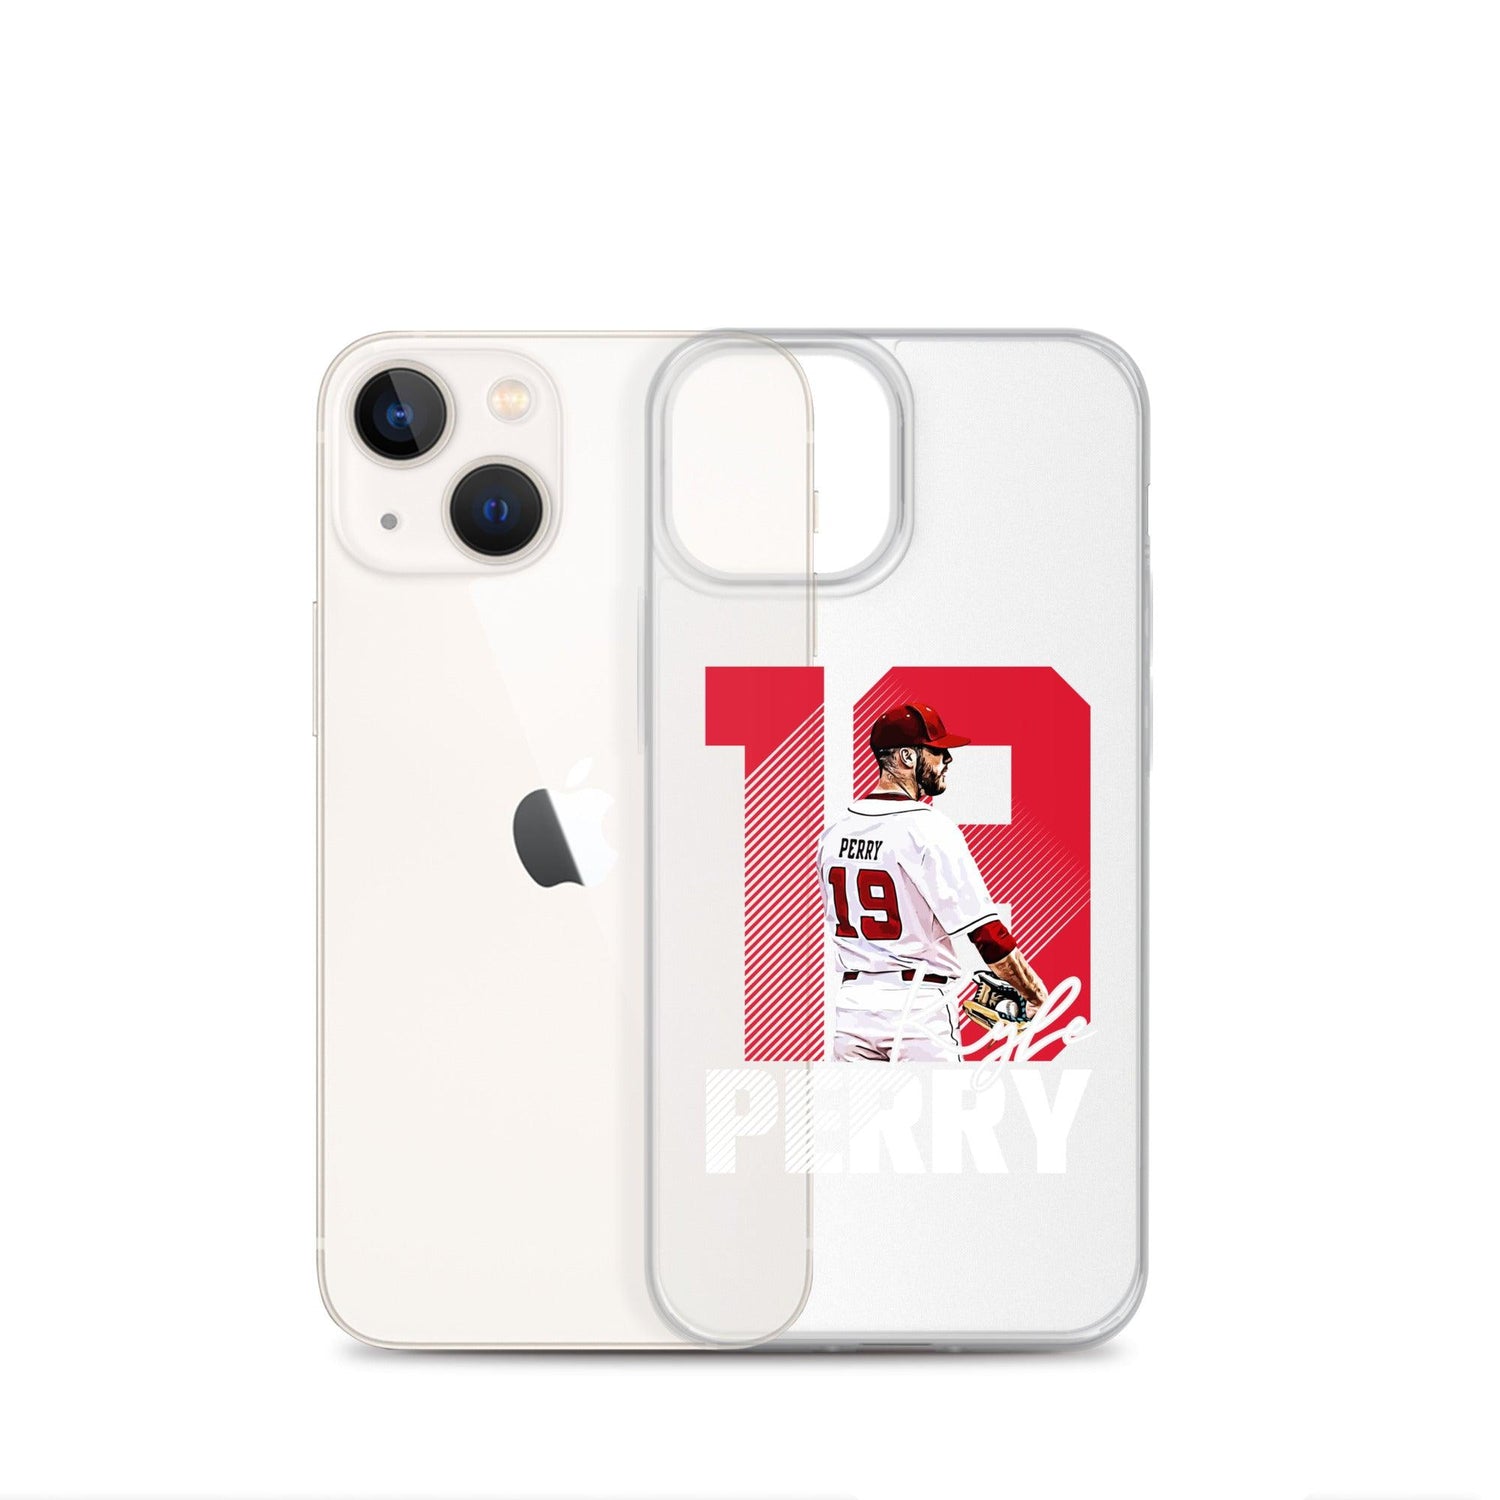 Kyle Perry "Gameday" iPhone Case - Fan Arch